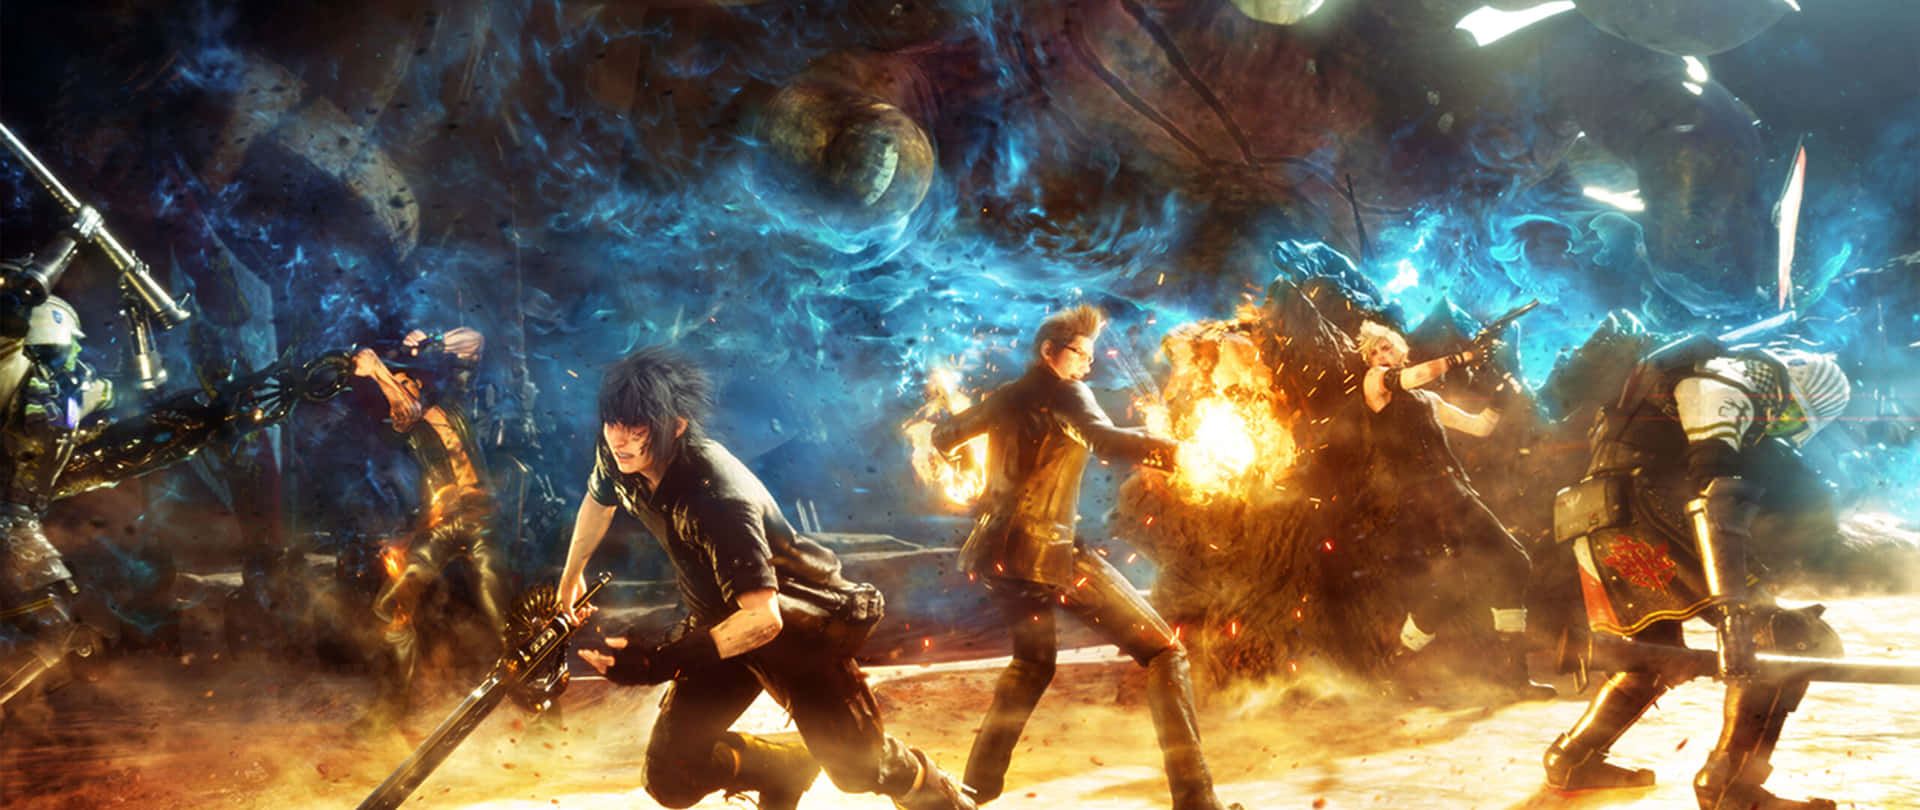 Final Fantasy XV Battlefield With Explosion Background